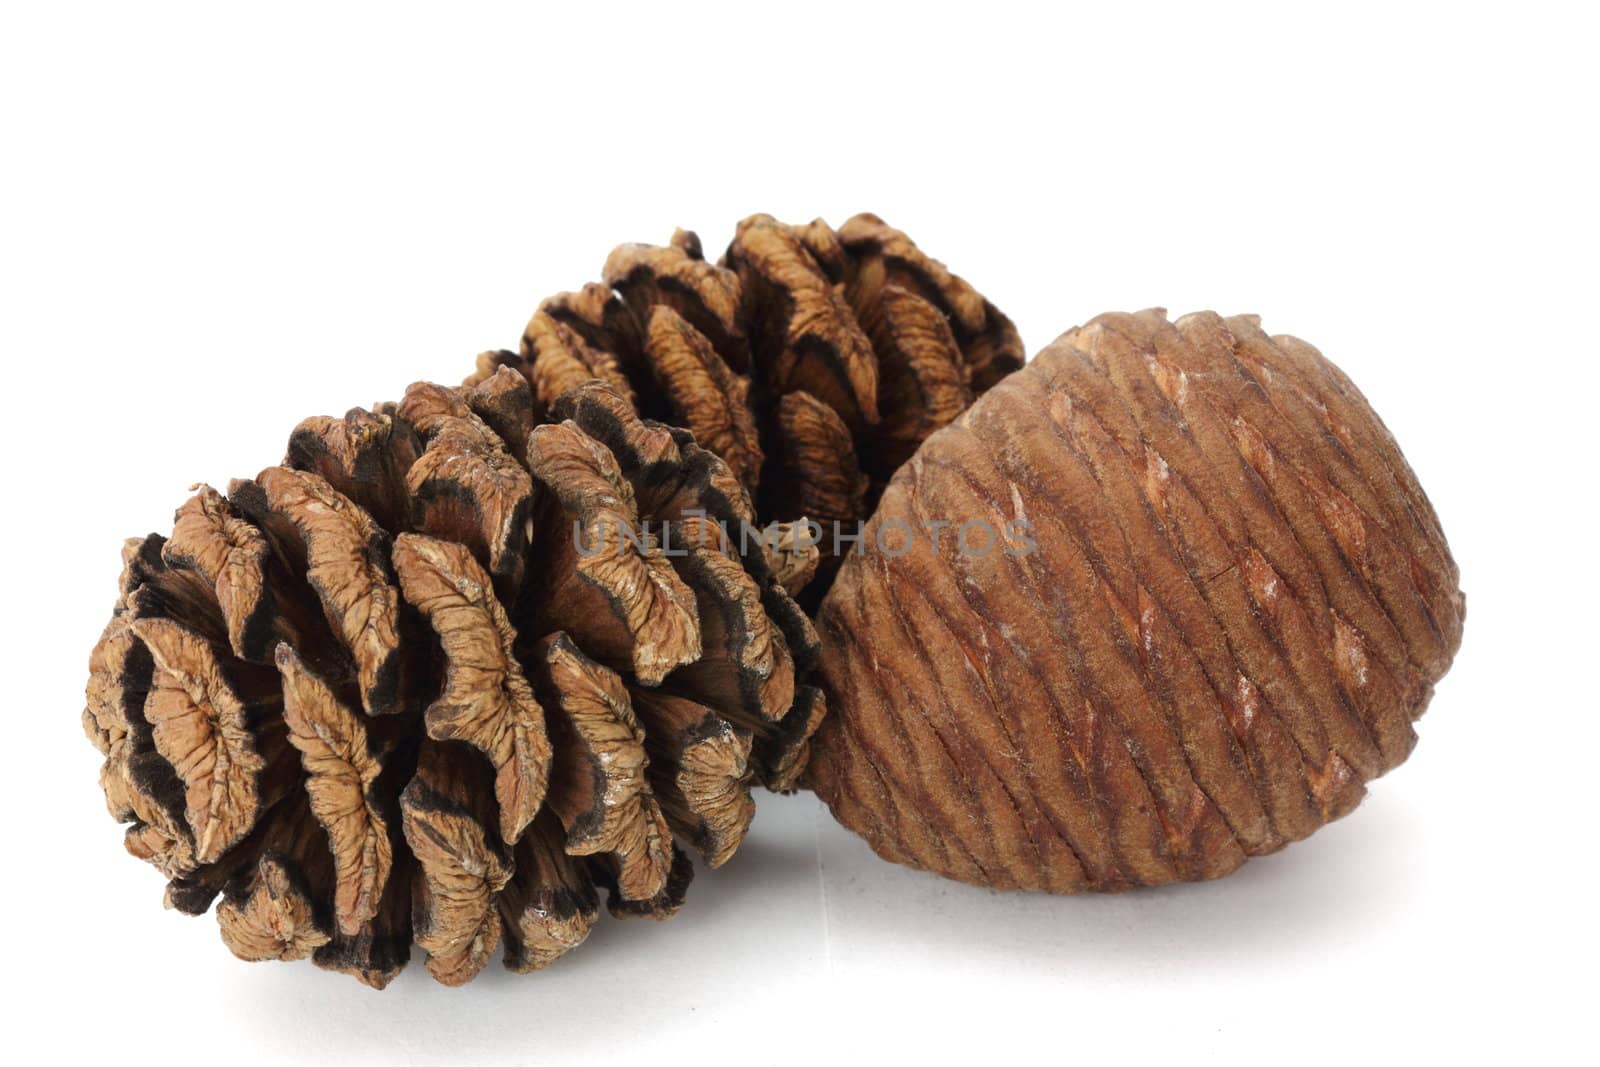 pine cones by taviphoto